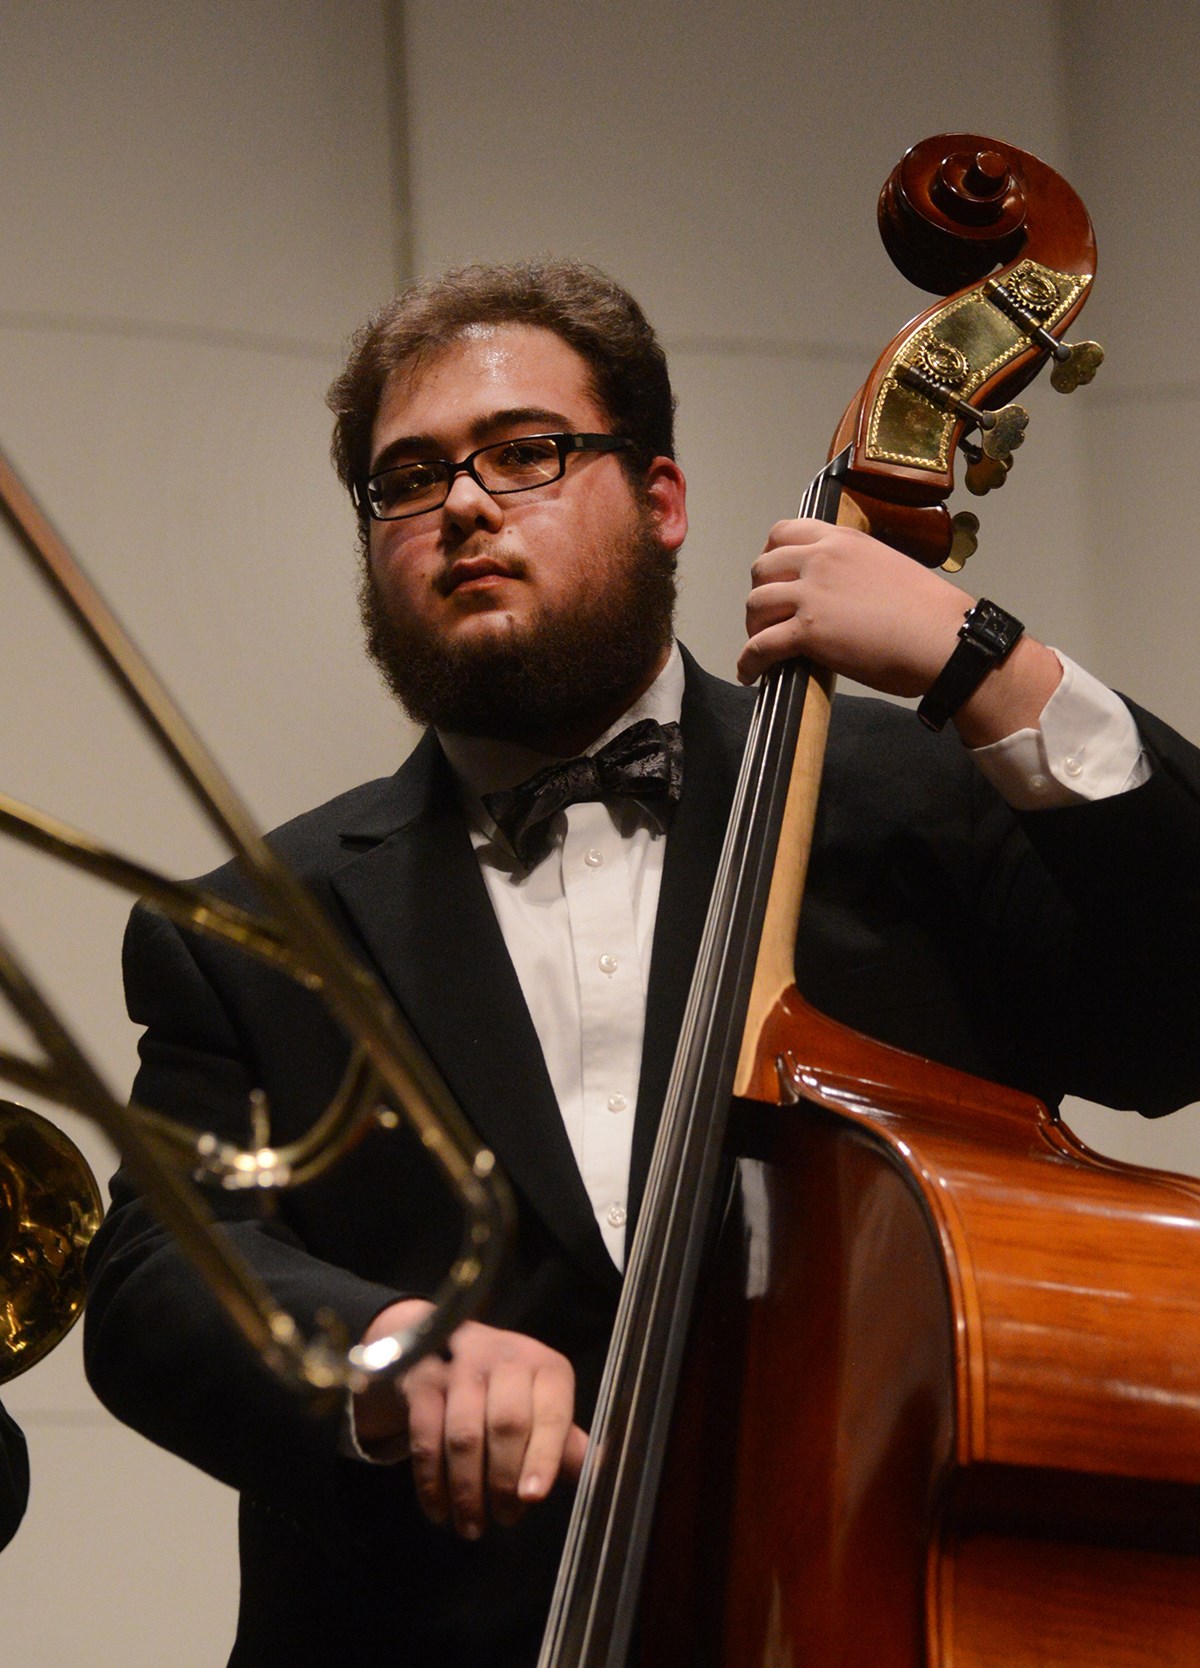 A bass player performs at the University Orchestra's "All You Need is Love!” Valentine's Day concert.